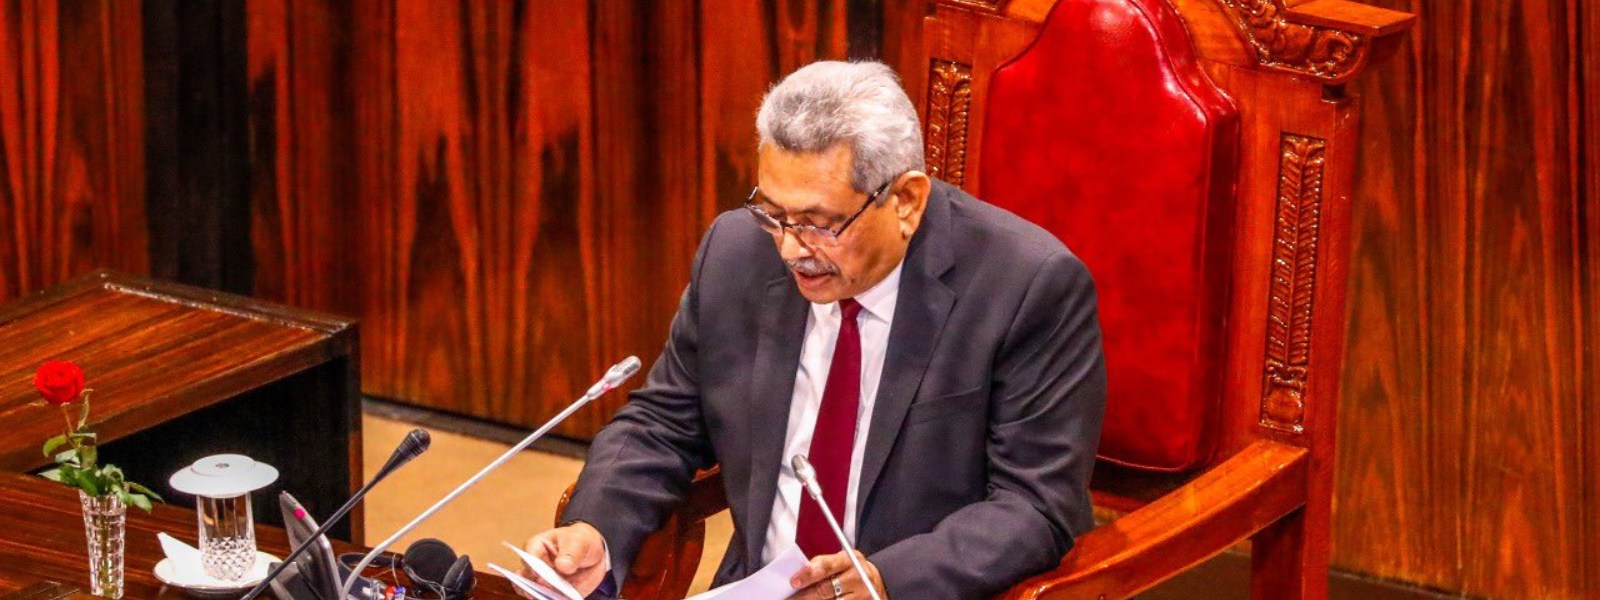 President presents policy statement in Parliament